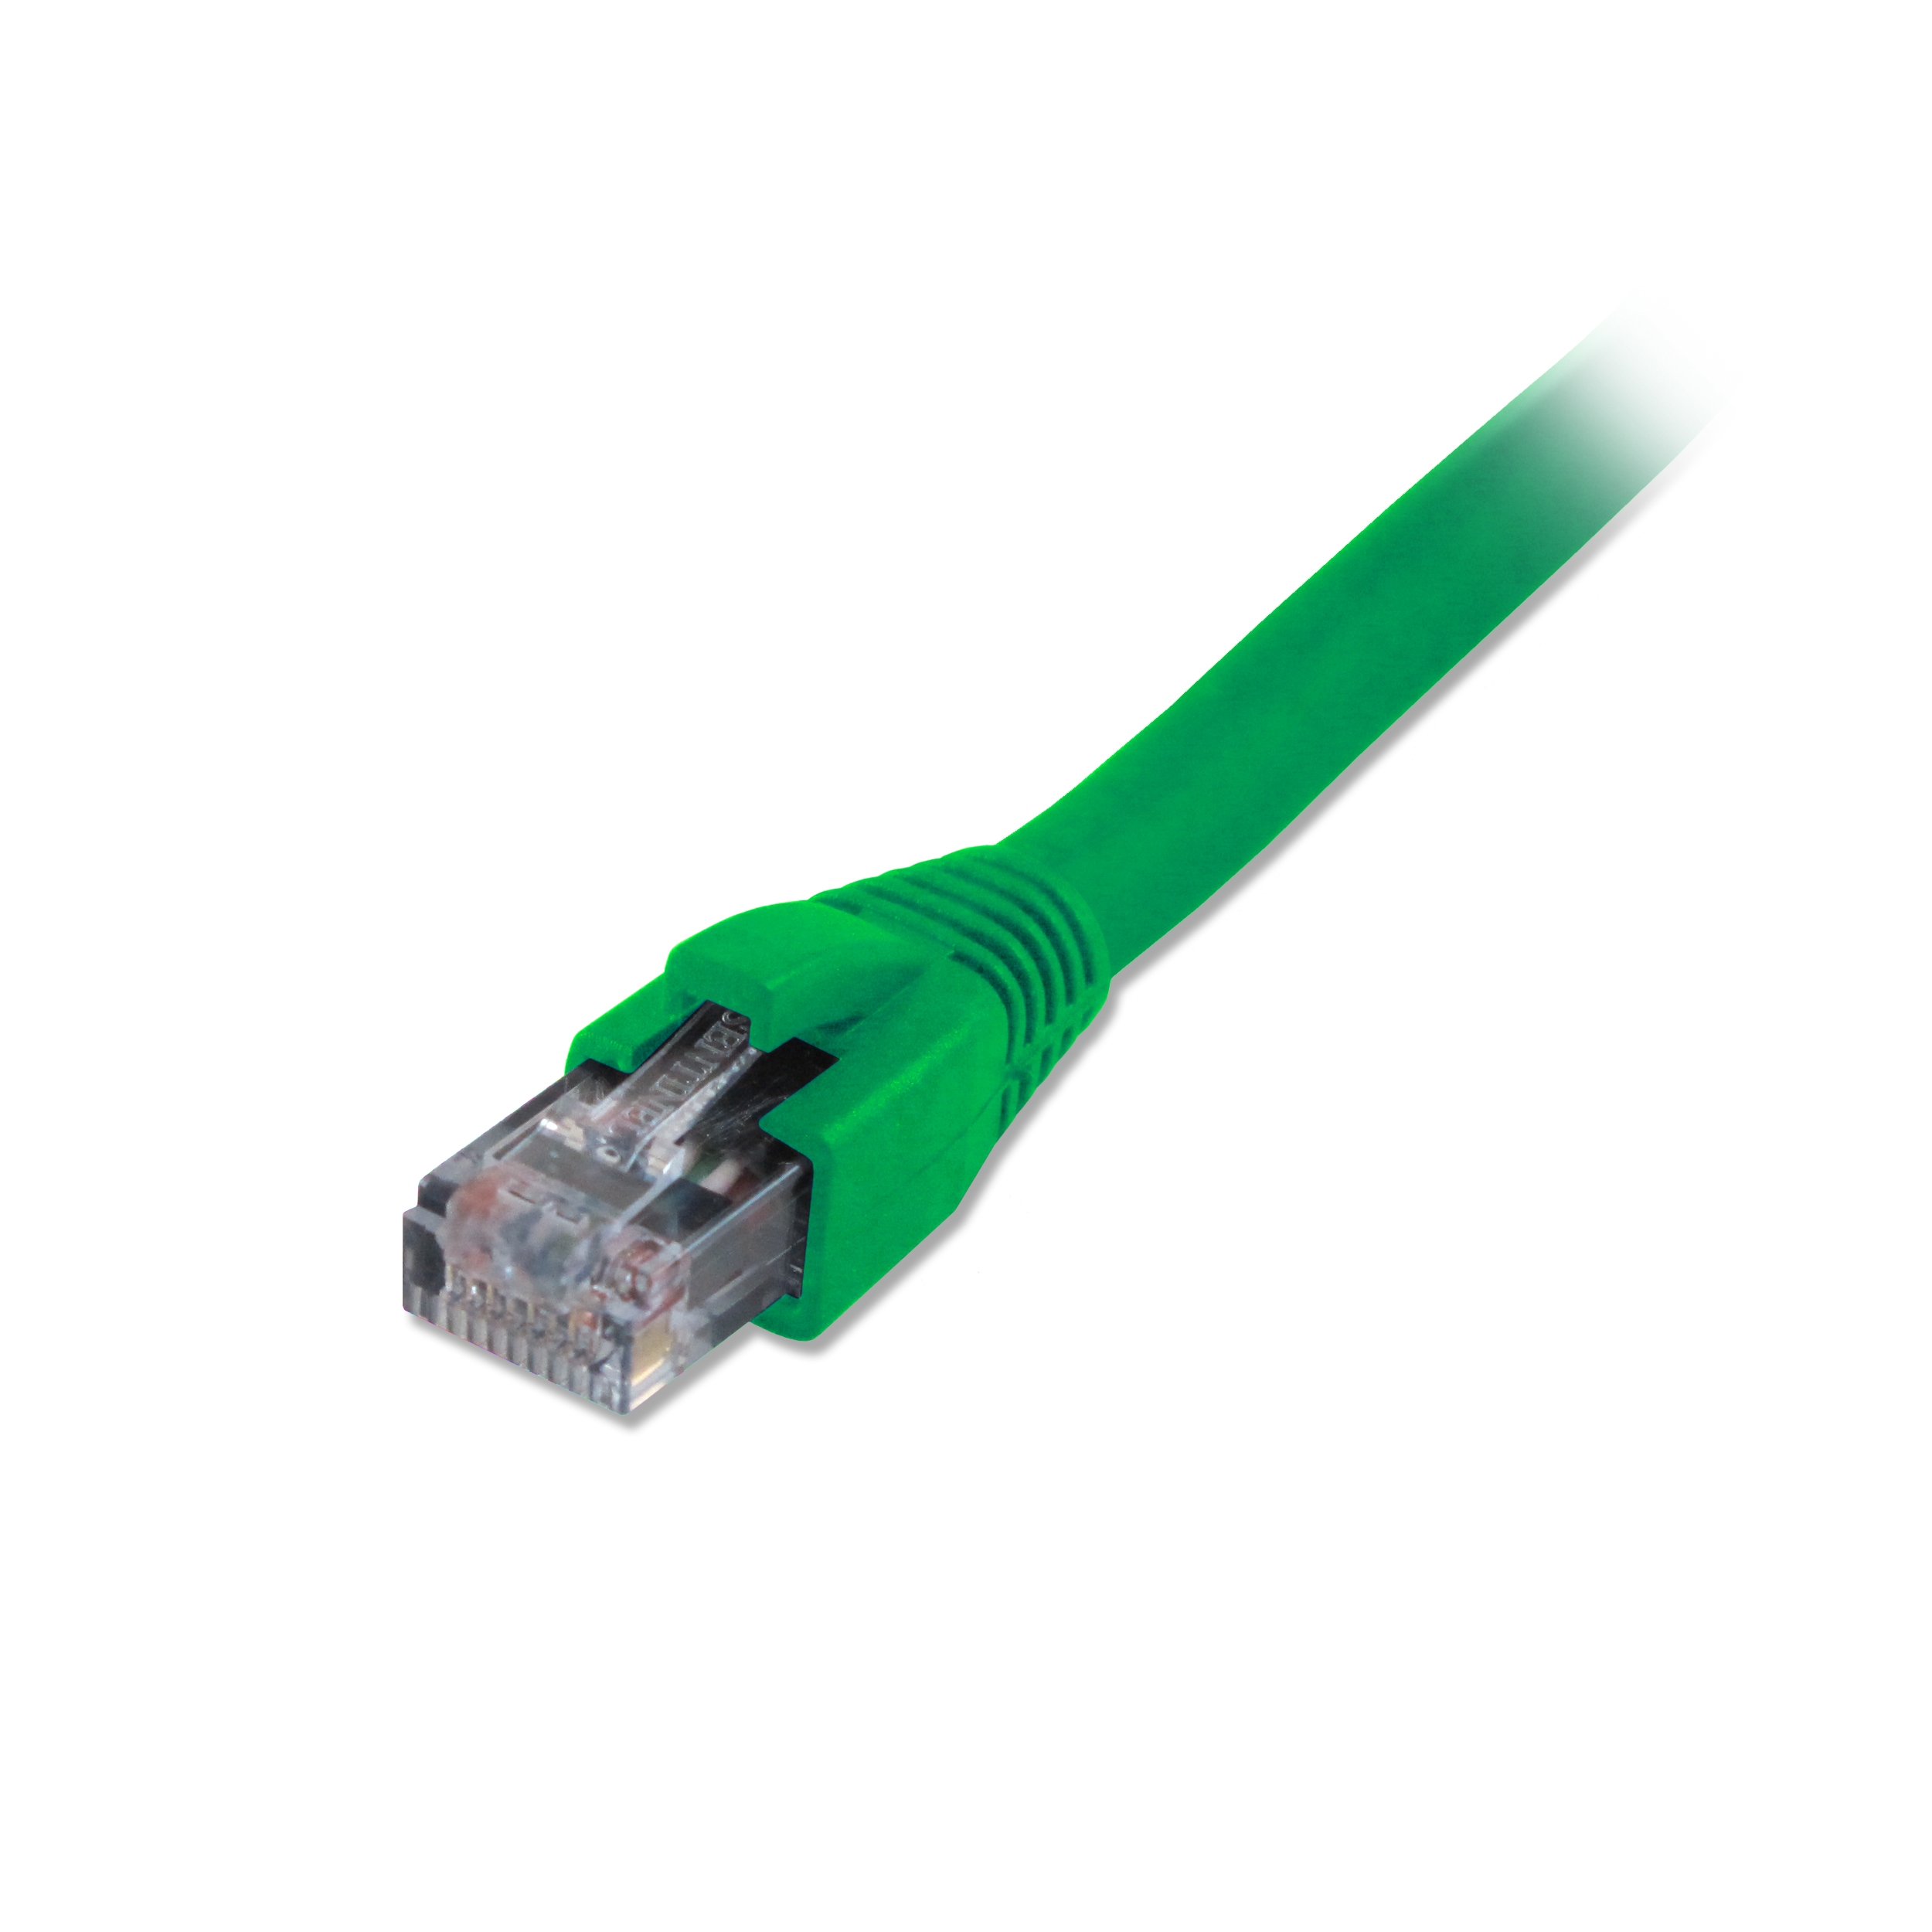 Comprehensive CAT5-350-5GRN Cat5e 350 Mhz Snagless Patch Cable 5ft Green